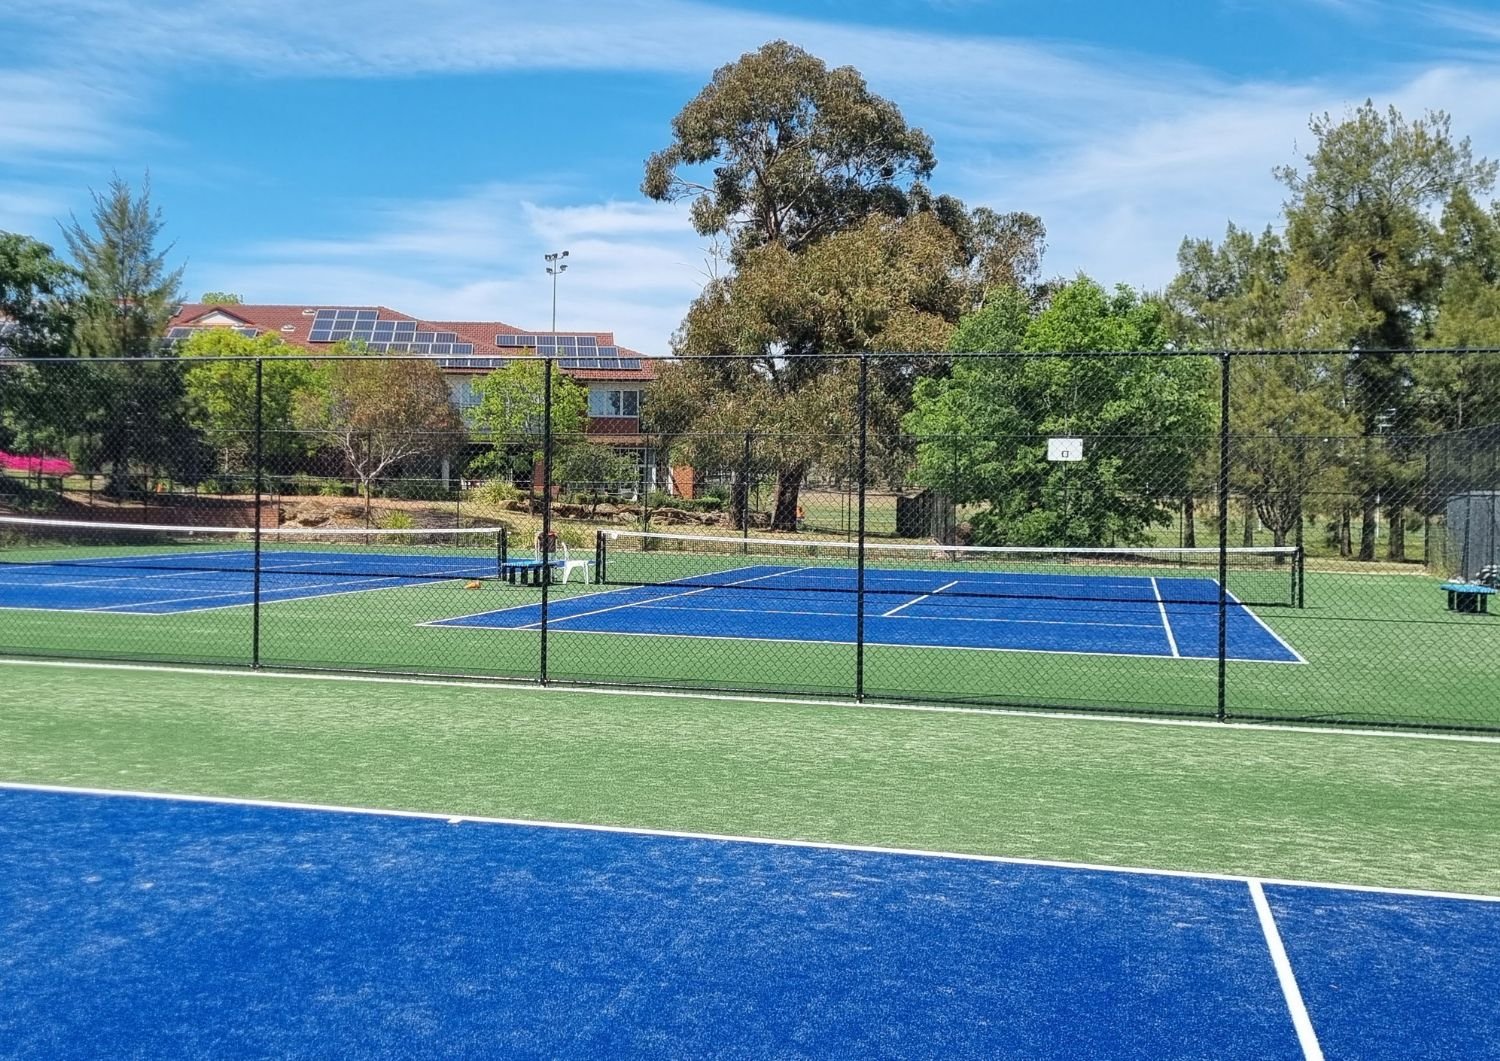 Blue and green tennis courts with benches and chairs